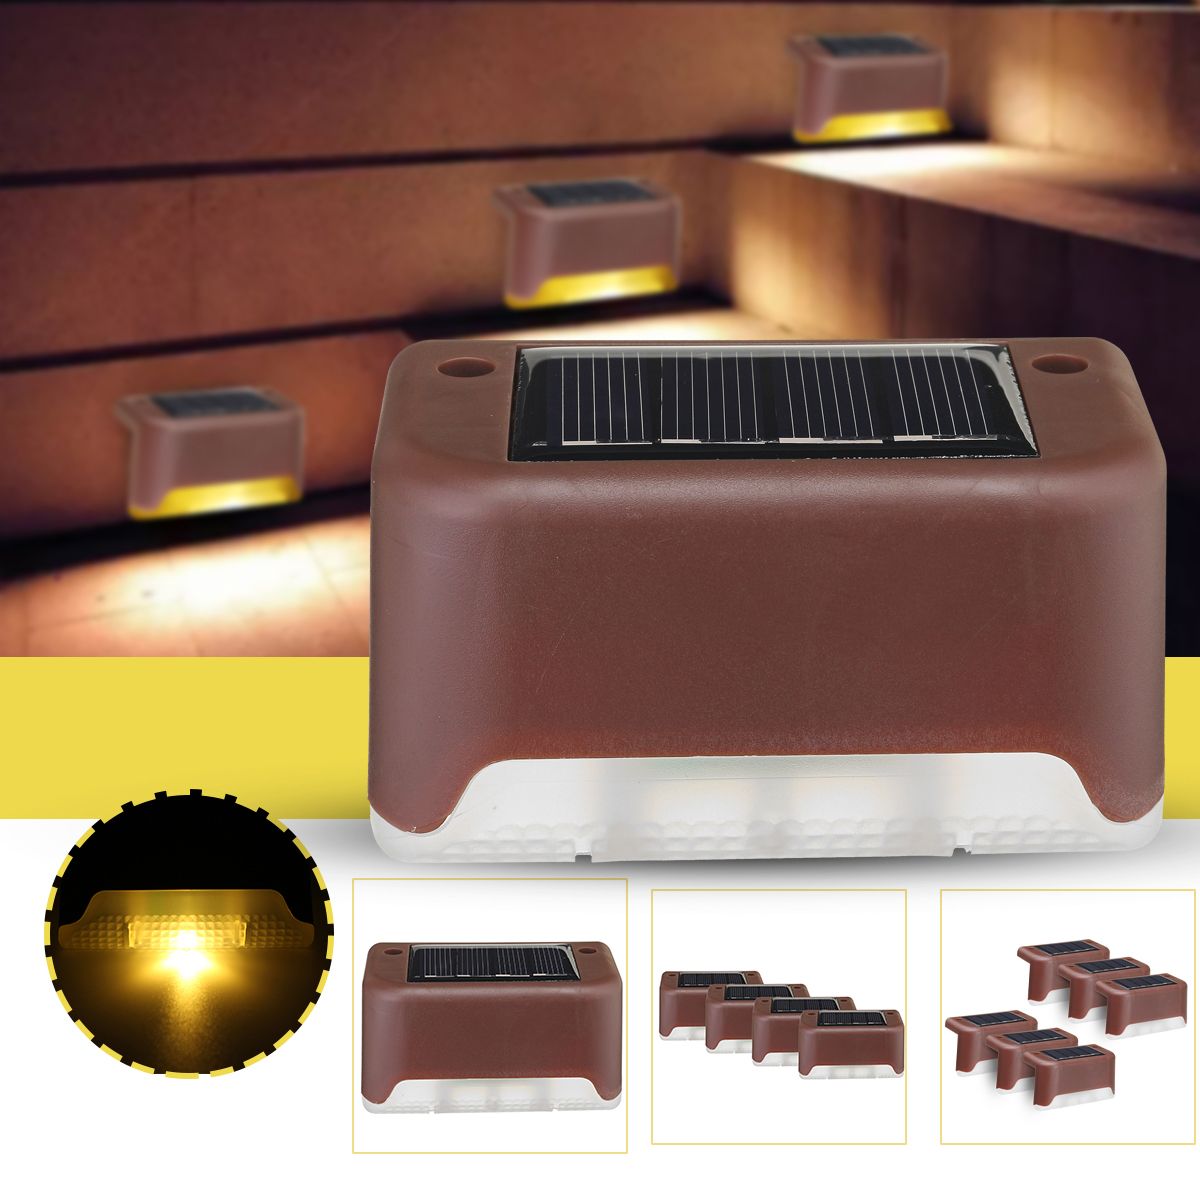 1PC4PCS6PCS-Solar-Powered-LED-Deck-Light-Warm-White-Outdoor-Path-Garden-Stairs-Step-Fence-Wall-Lamp-1705500